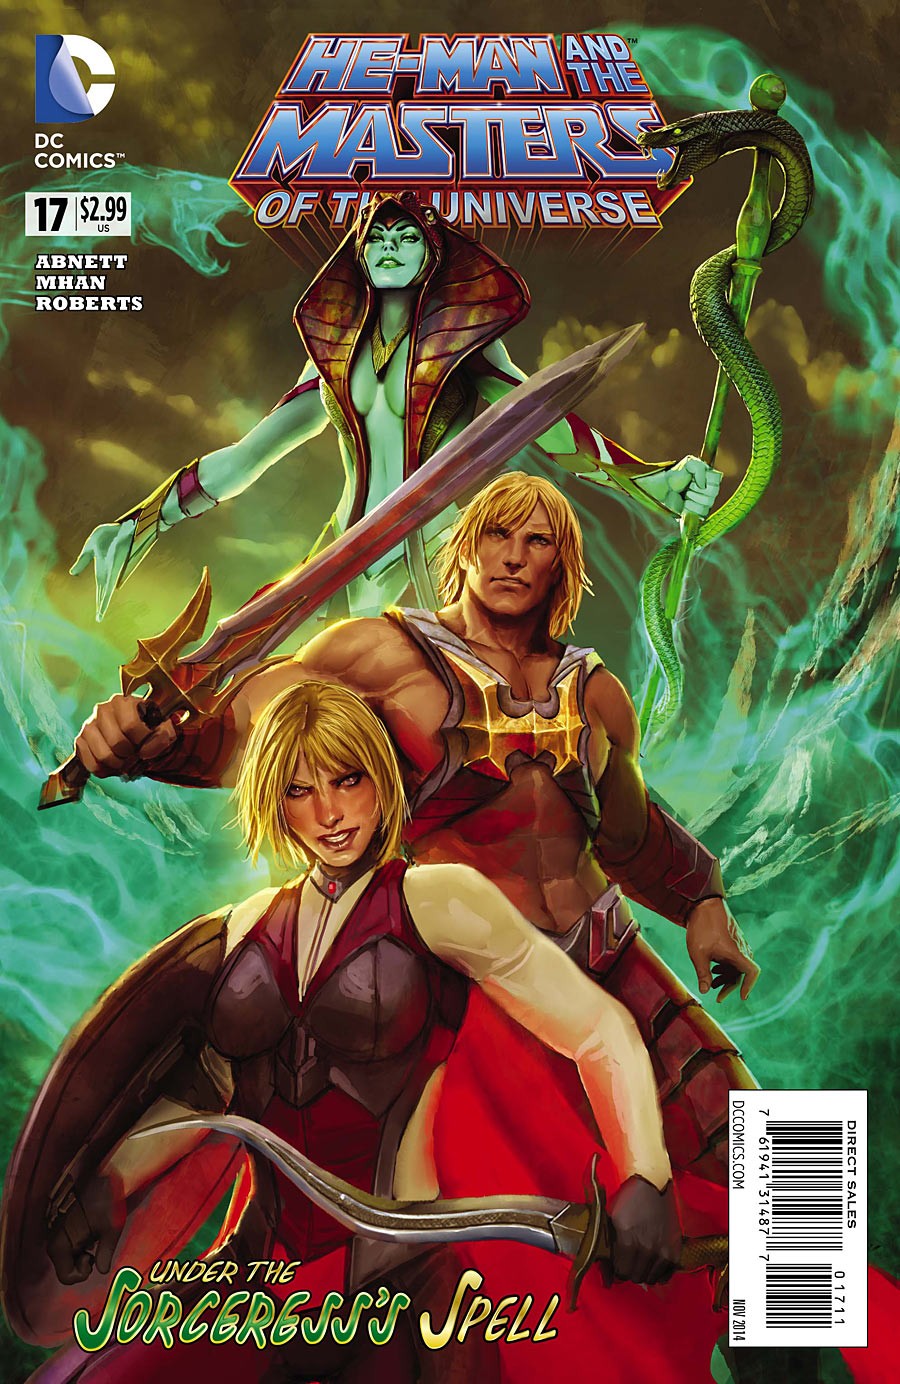 He-Man and the Masters of the Universe Vol. 2 #17